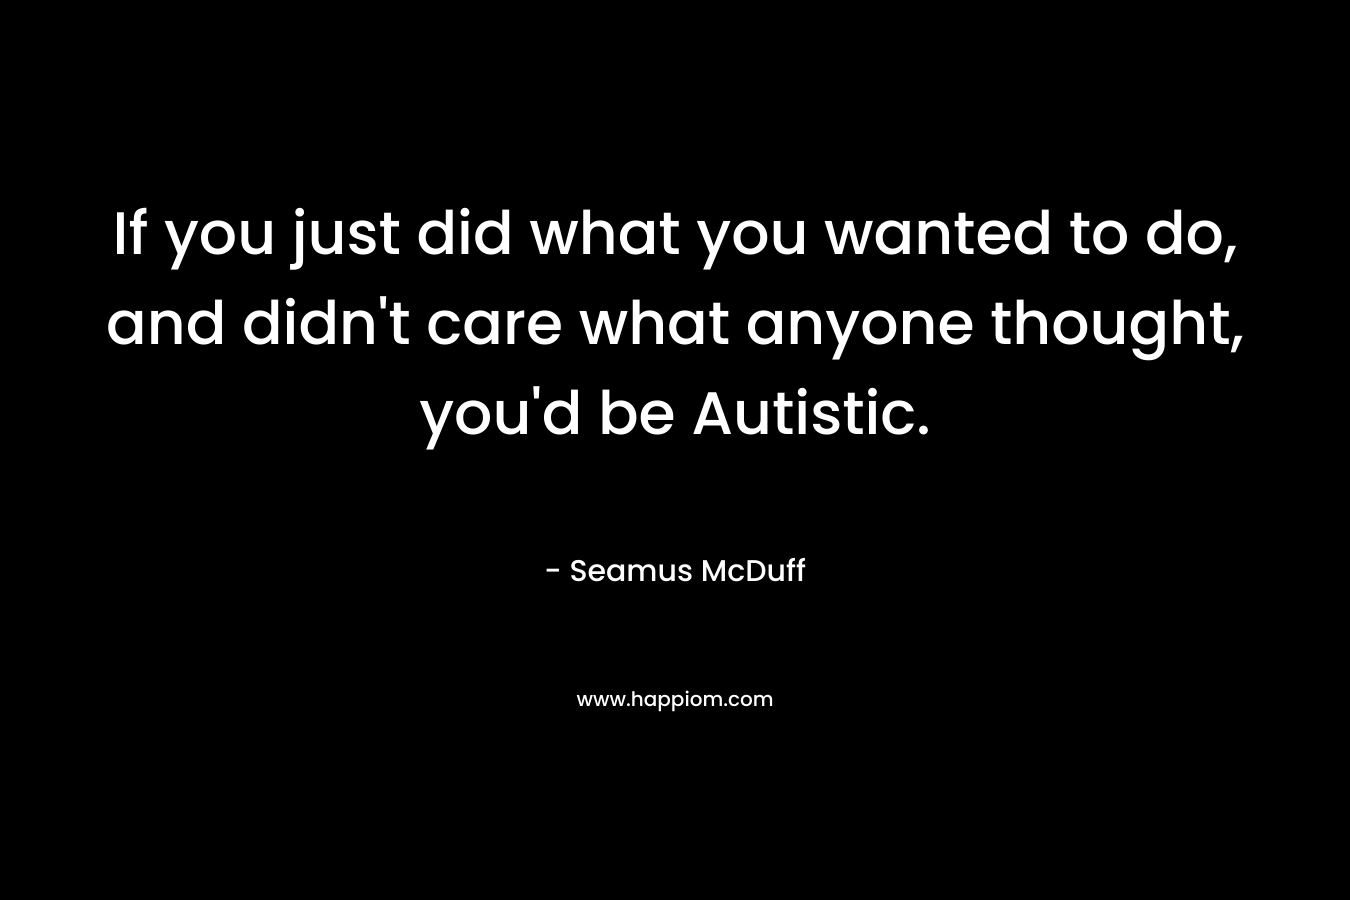 If you just did what you wanted to do, and didn’t care what anyone thought, you’d be Autistic. – Seamus McDuff